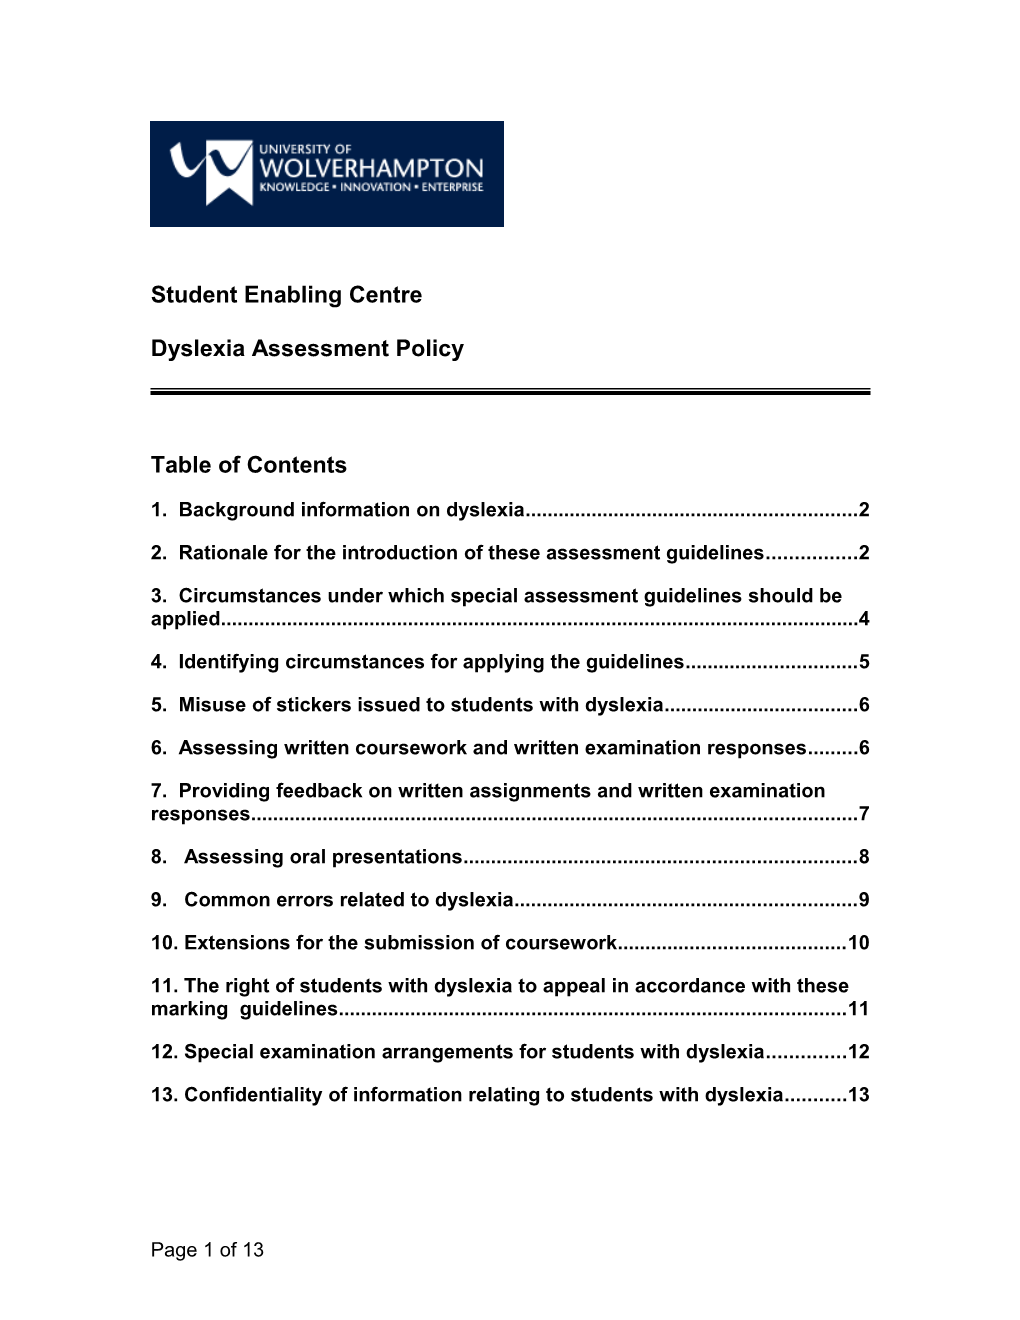 Guidelines for Marking the Work of Students Who Have Dyslexia